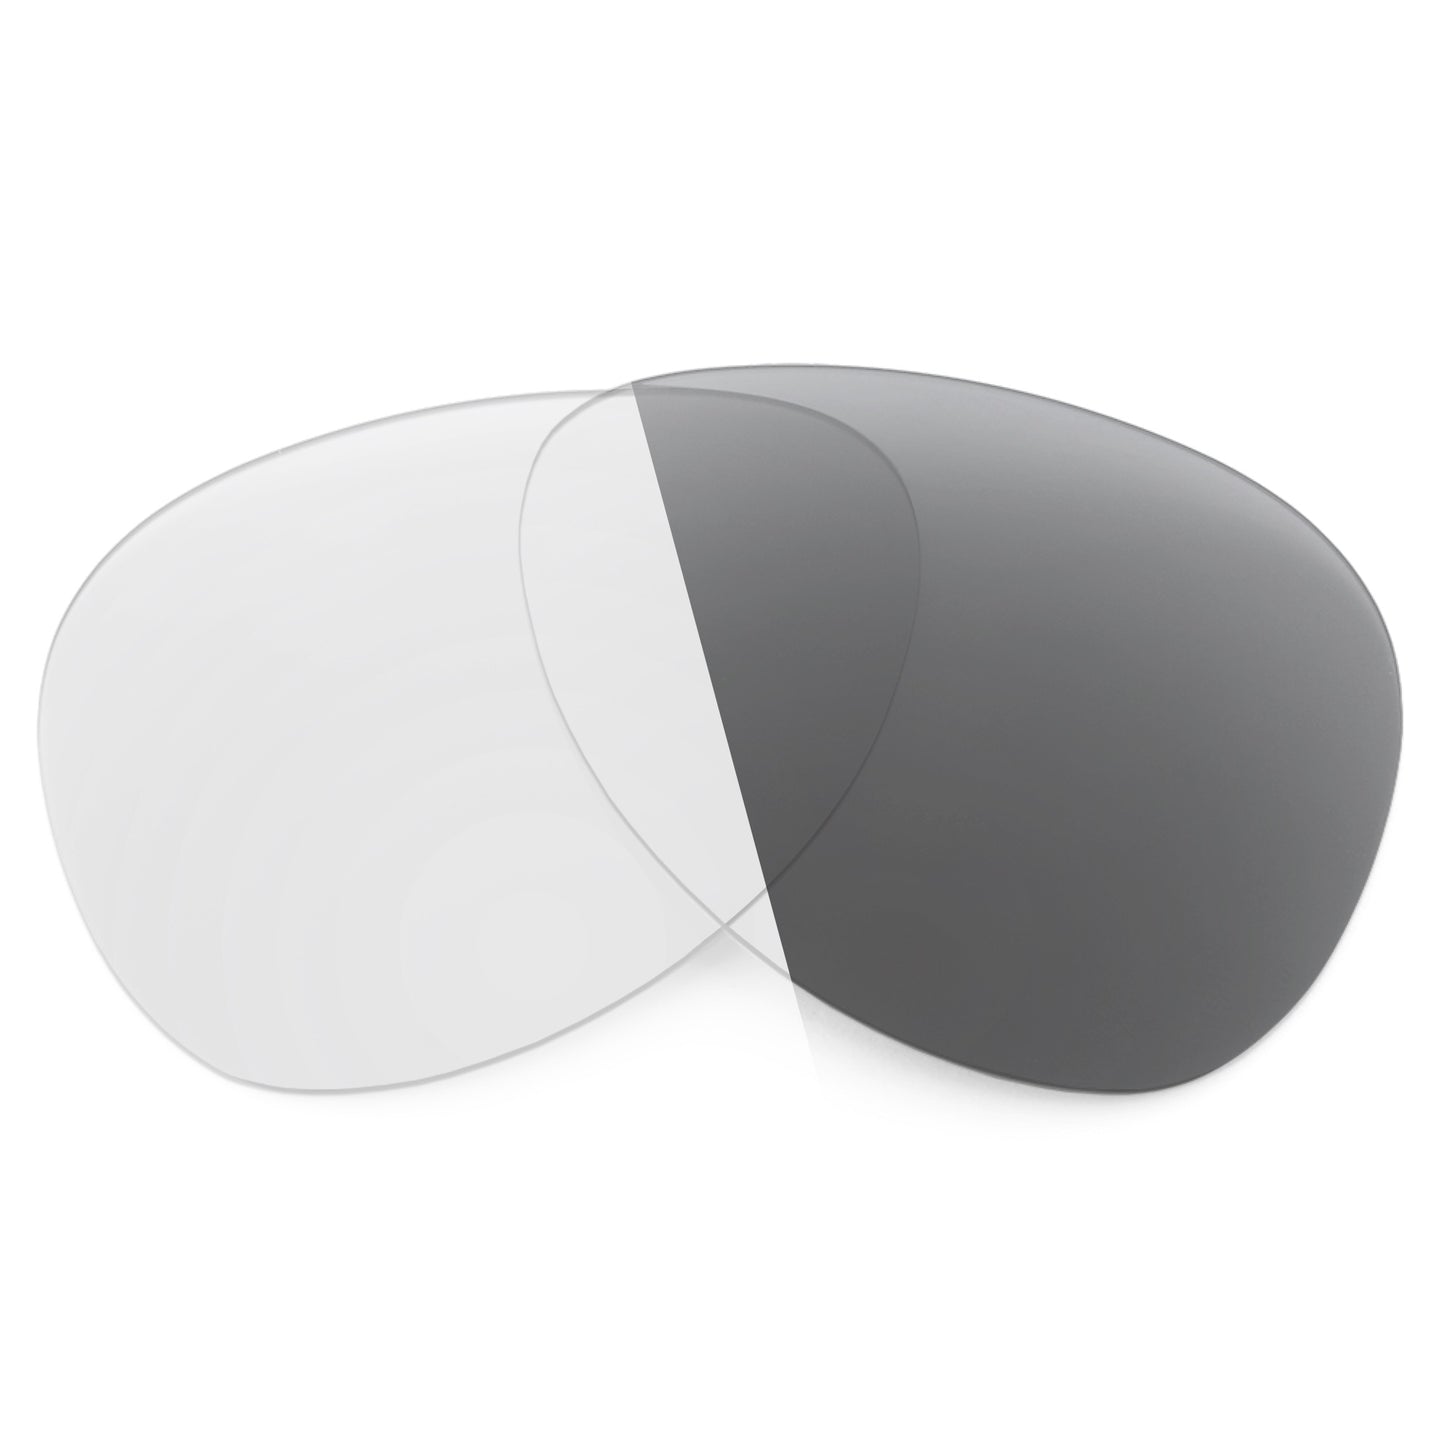 Revant replacement lenses for Ray-Ban RB8063 Titanium 55mm Non-Polarized Adapt Gray Photochromic